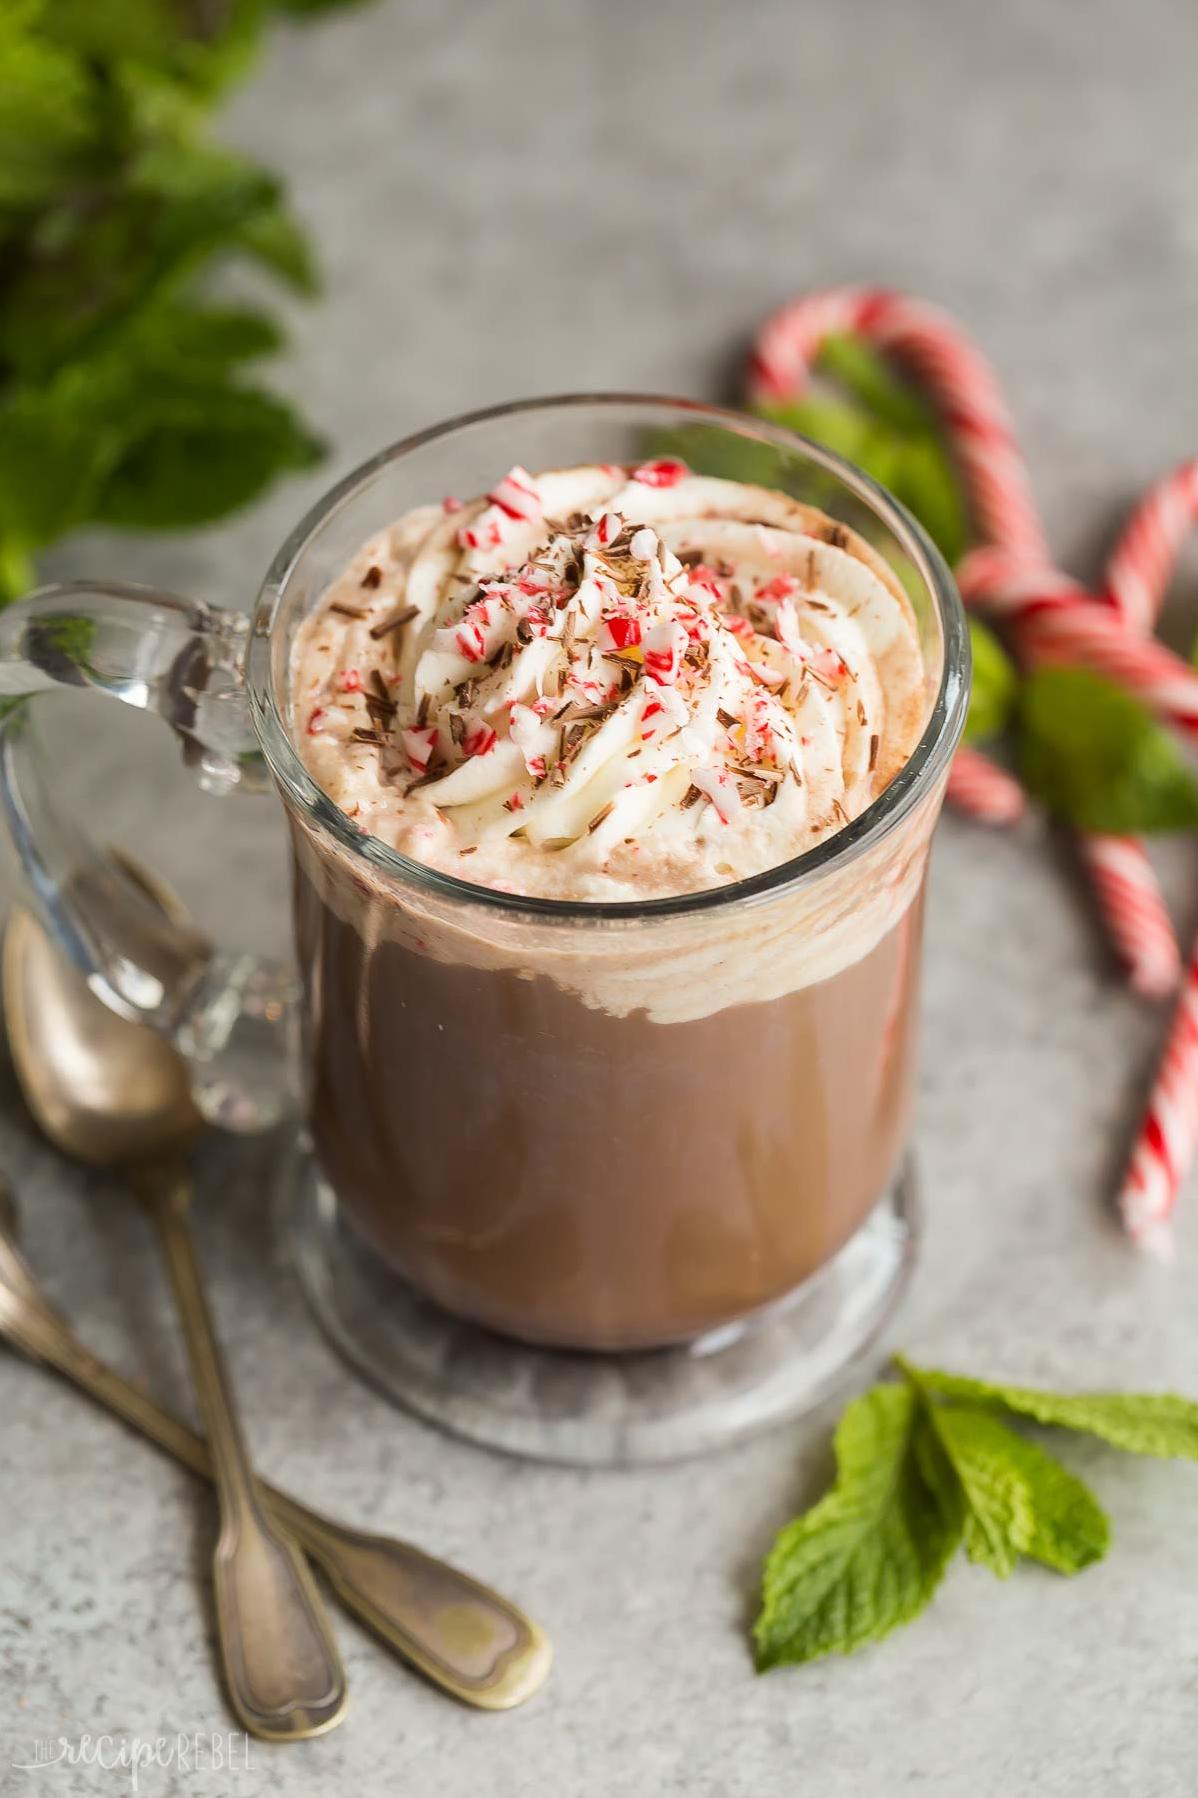  Get ready for a cozy and comforting experience with every sip of this mocha mint coffee